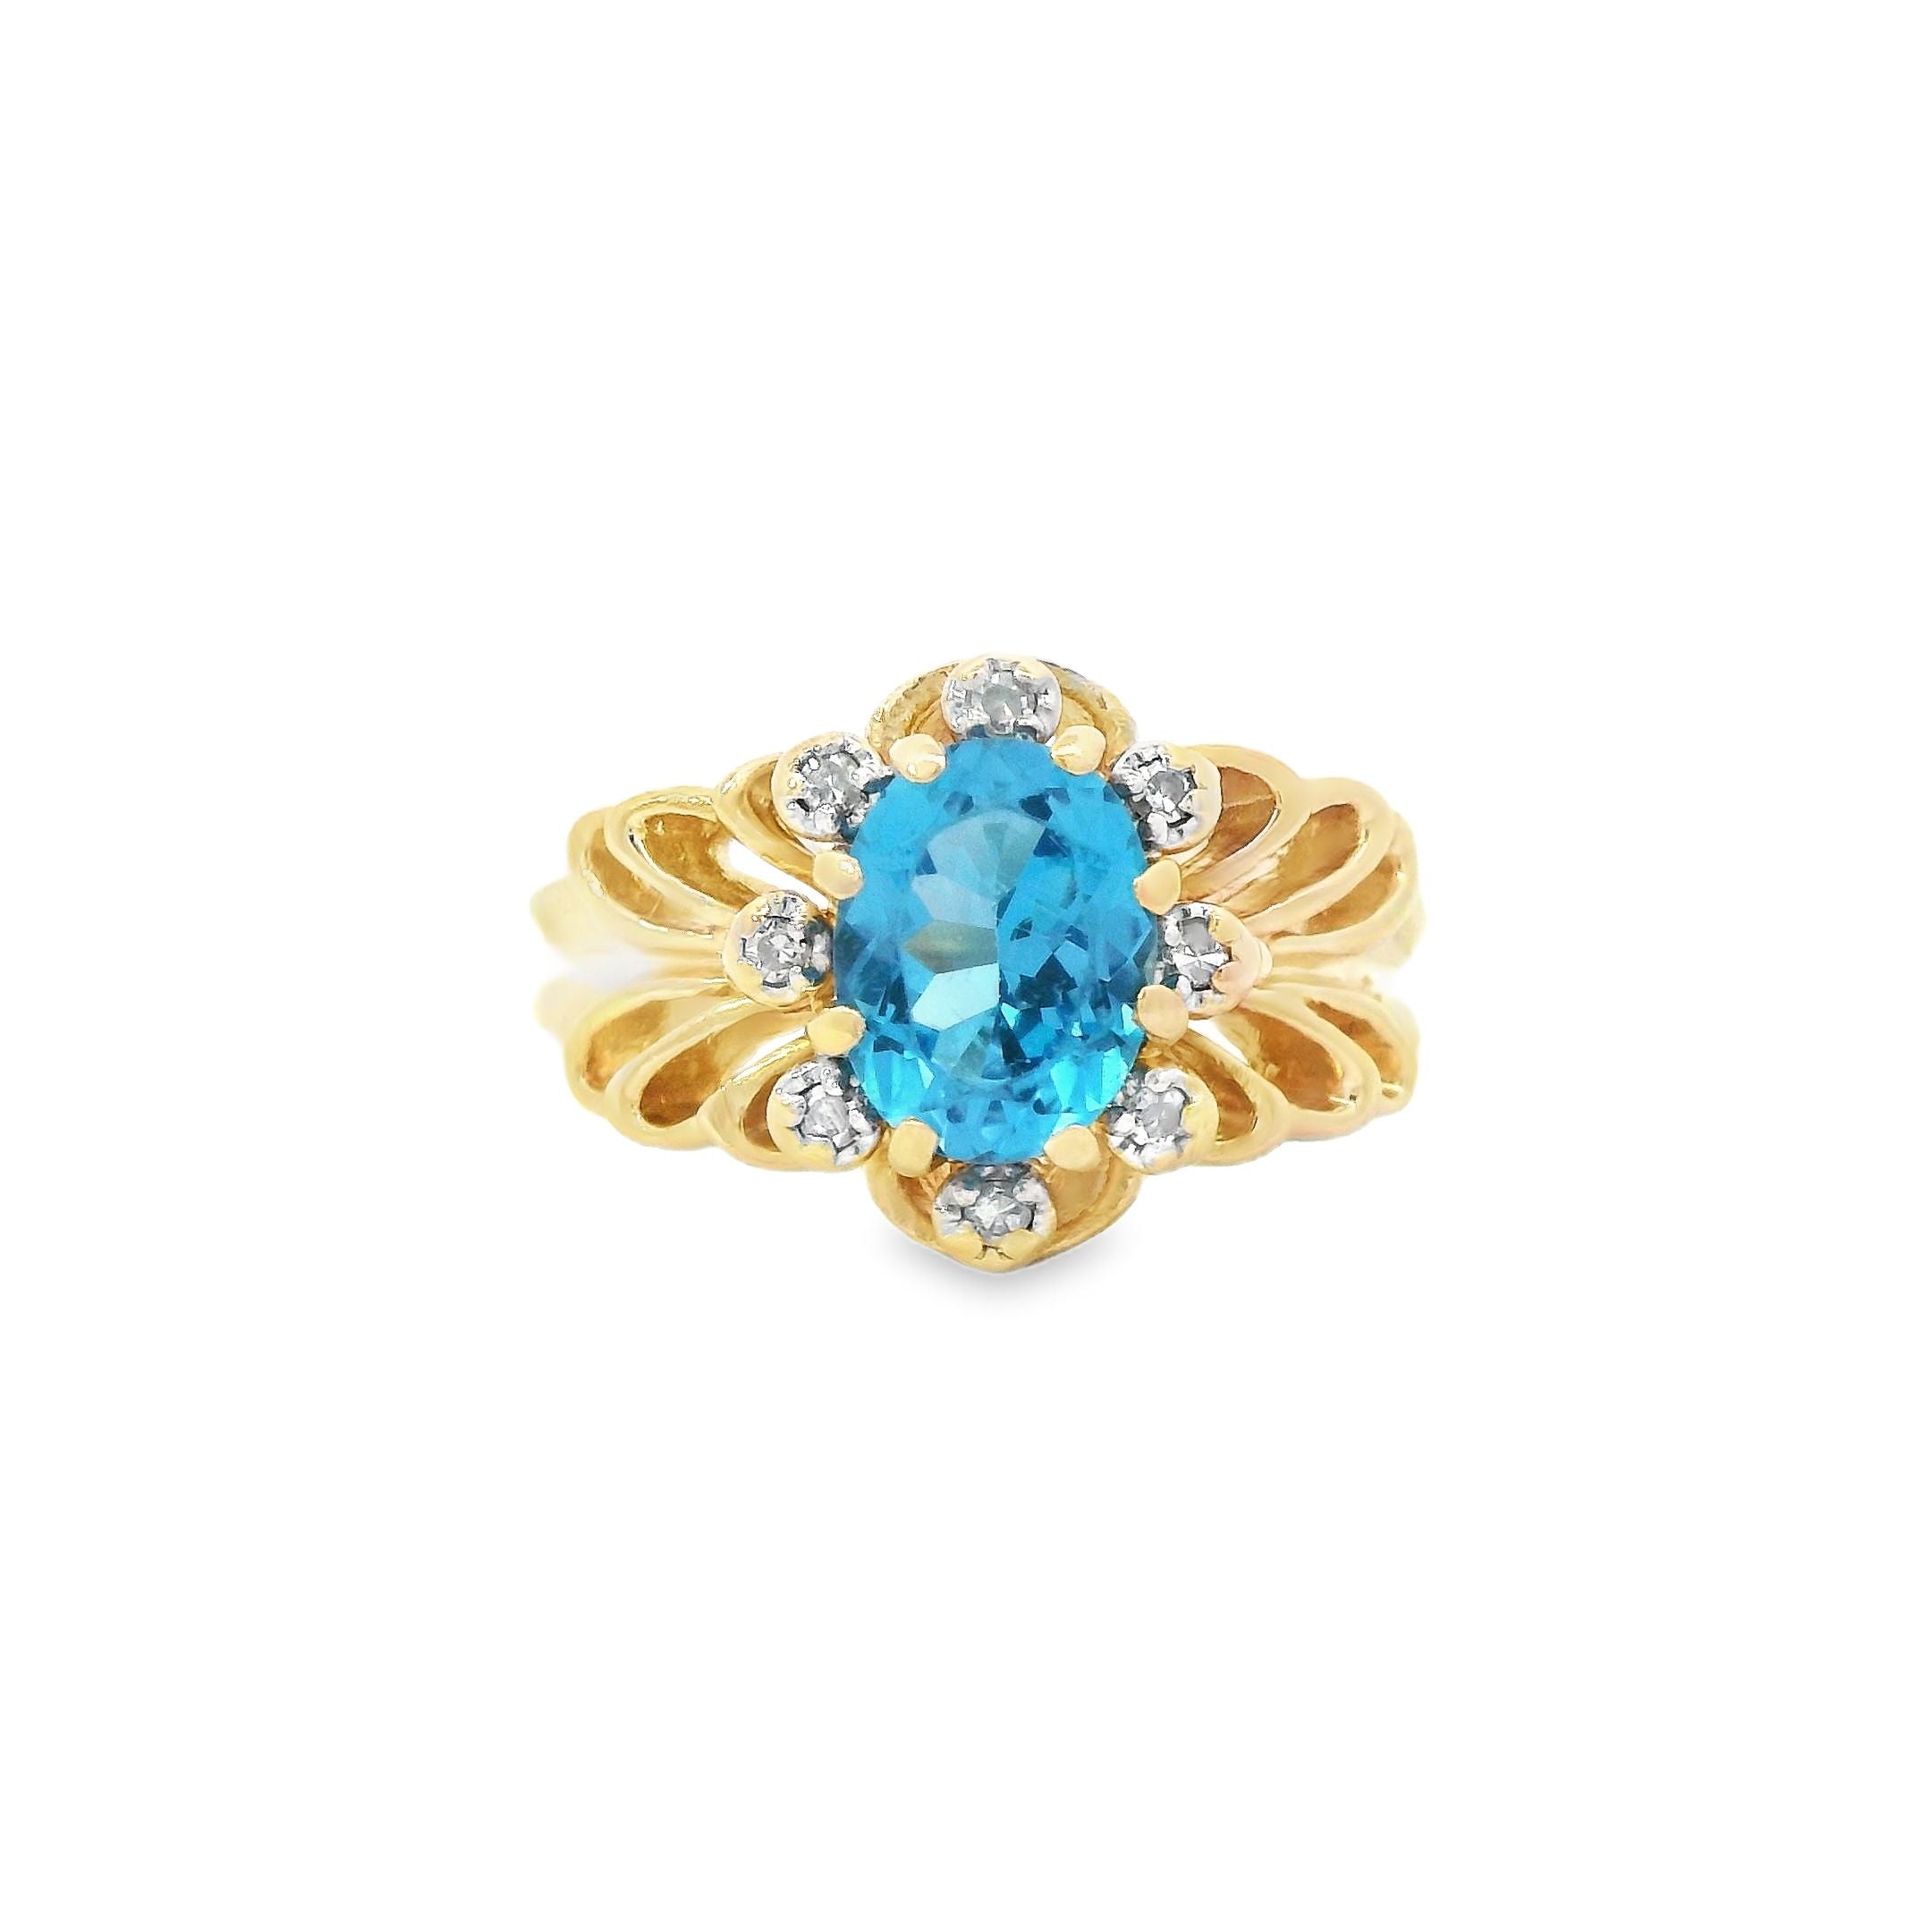 Estate Collection: 10K Yellow Gold Ornate Oval Blue Topaz & Diamond Ring